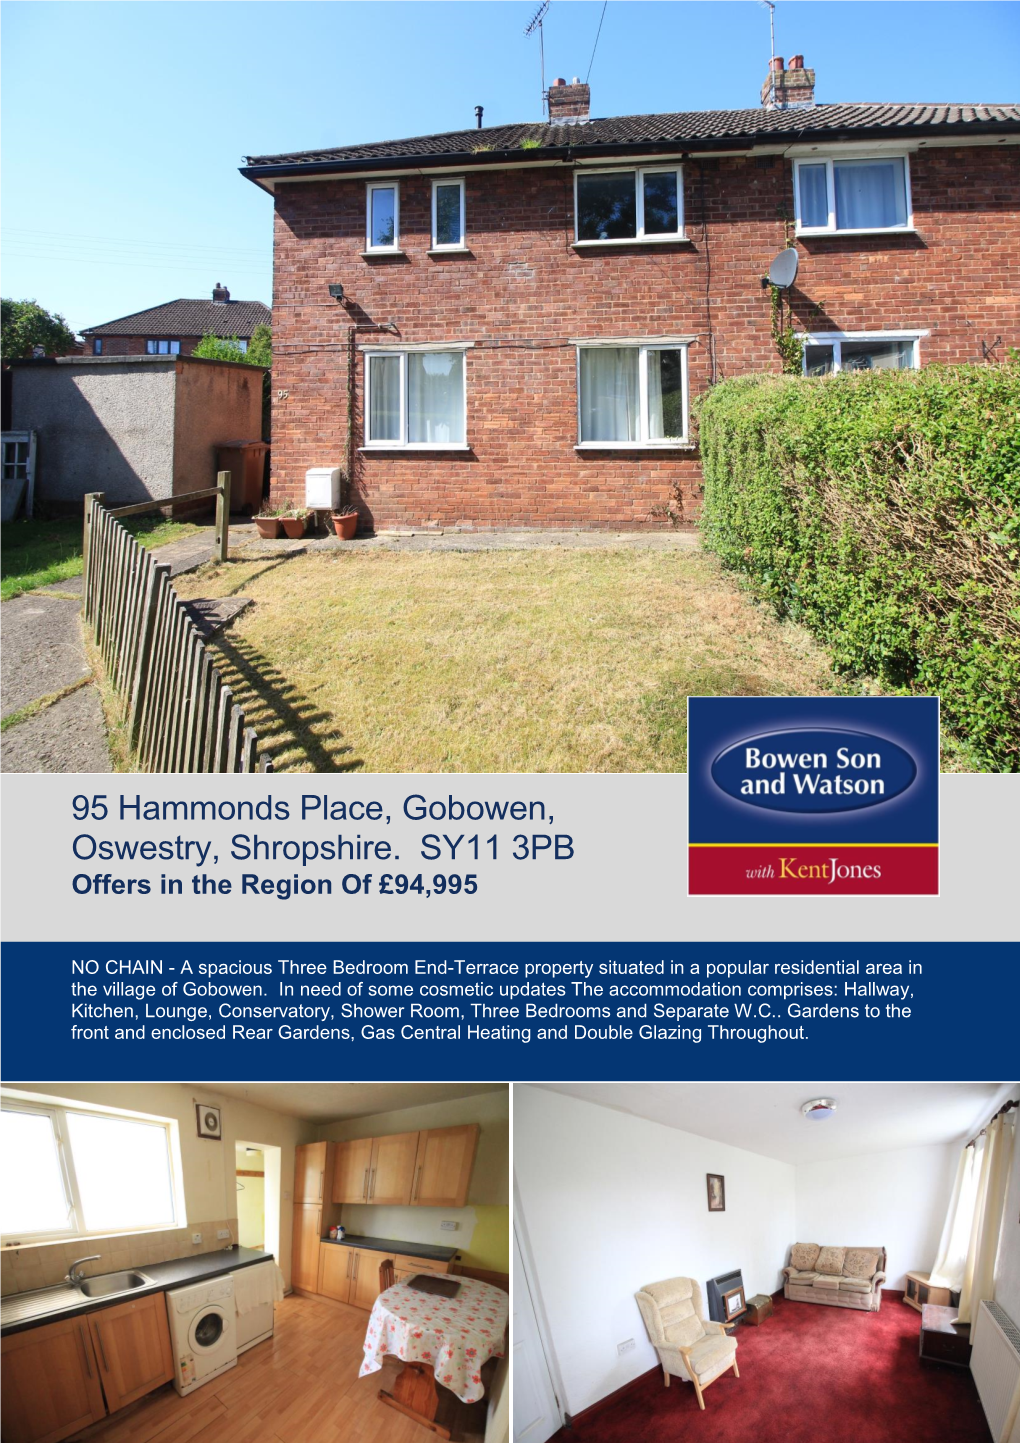 95 Hammonds Place, Gobowen, Oswestry, Shropshire. SY11 3PB Offers in the Region of £94,995